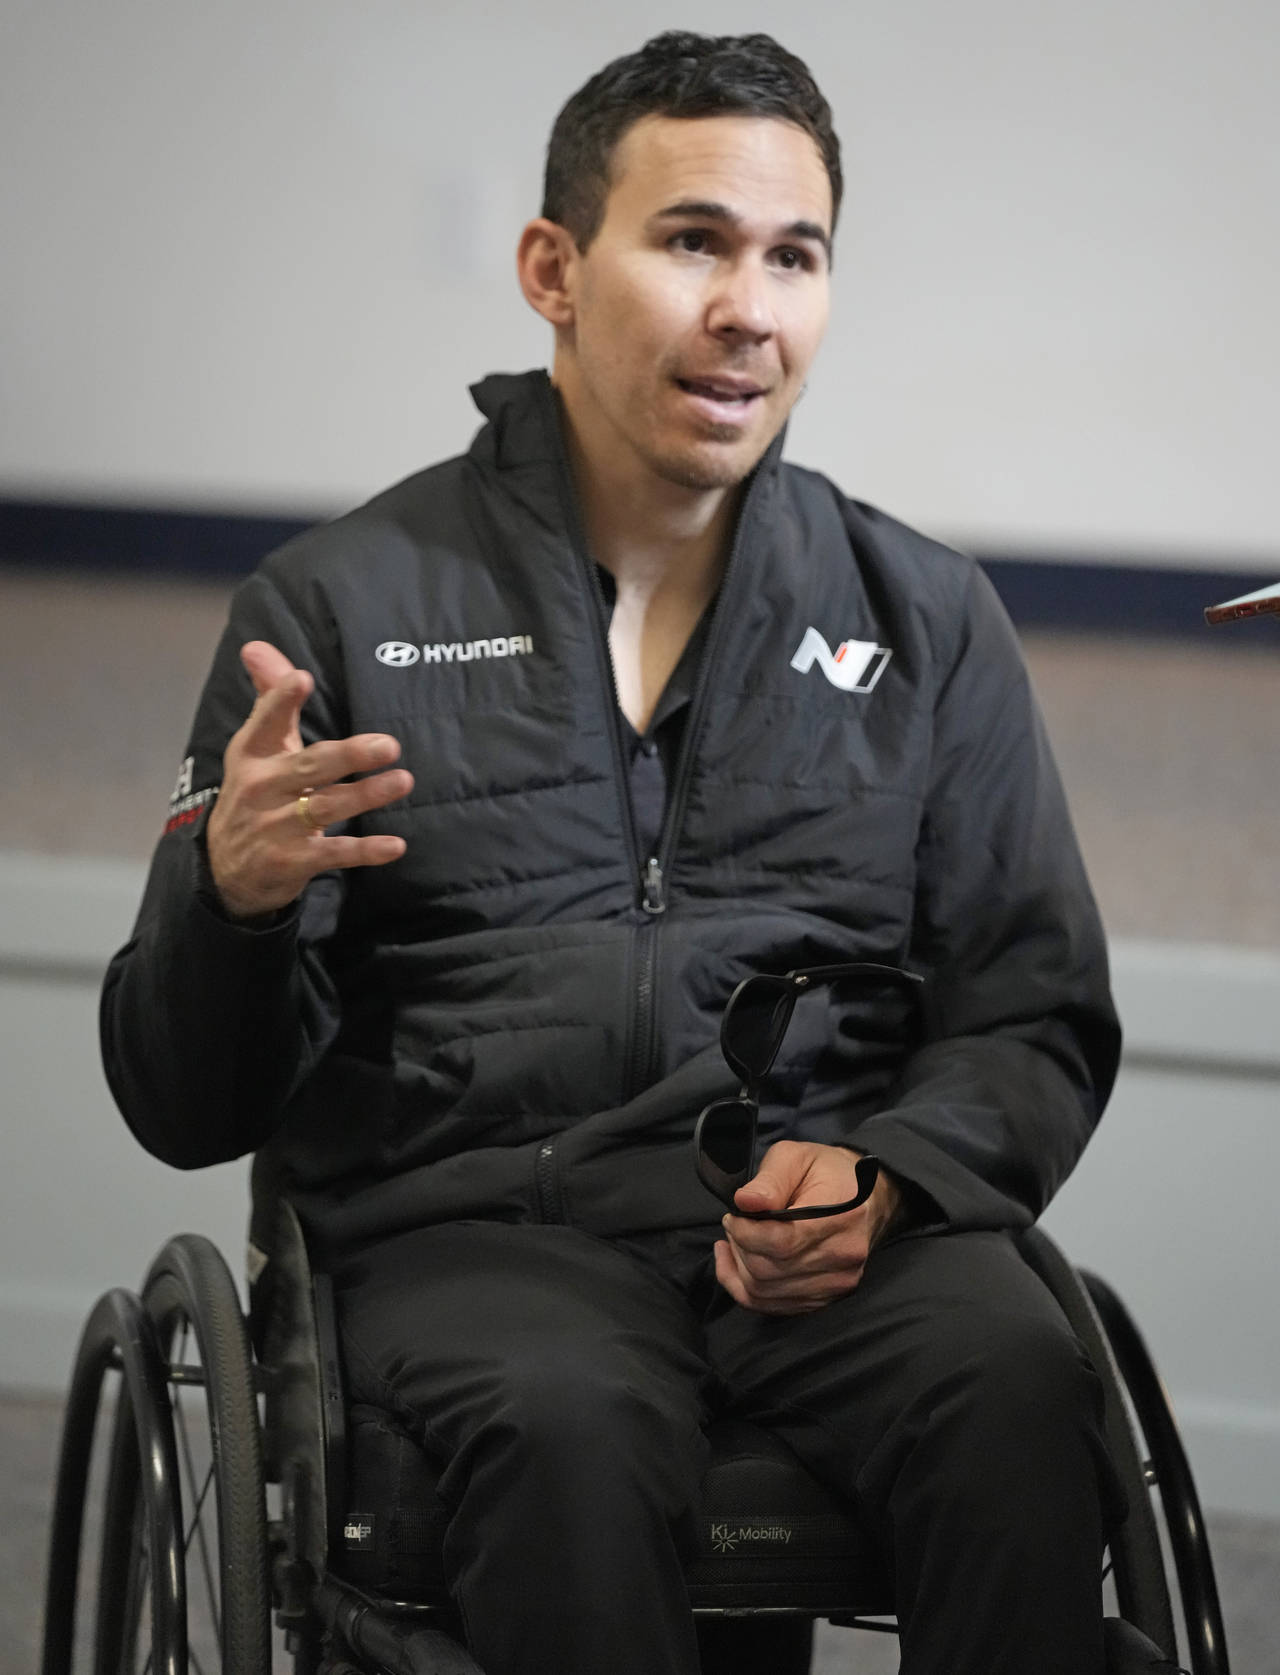 Robert Wickens answers questions during an interview prior to the Rolex 24 hour auto race at Dayton...